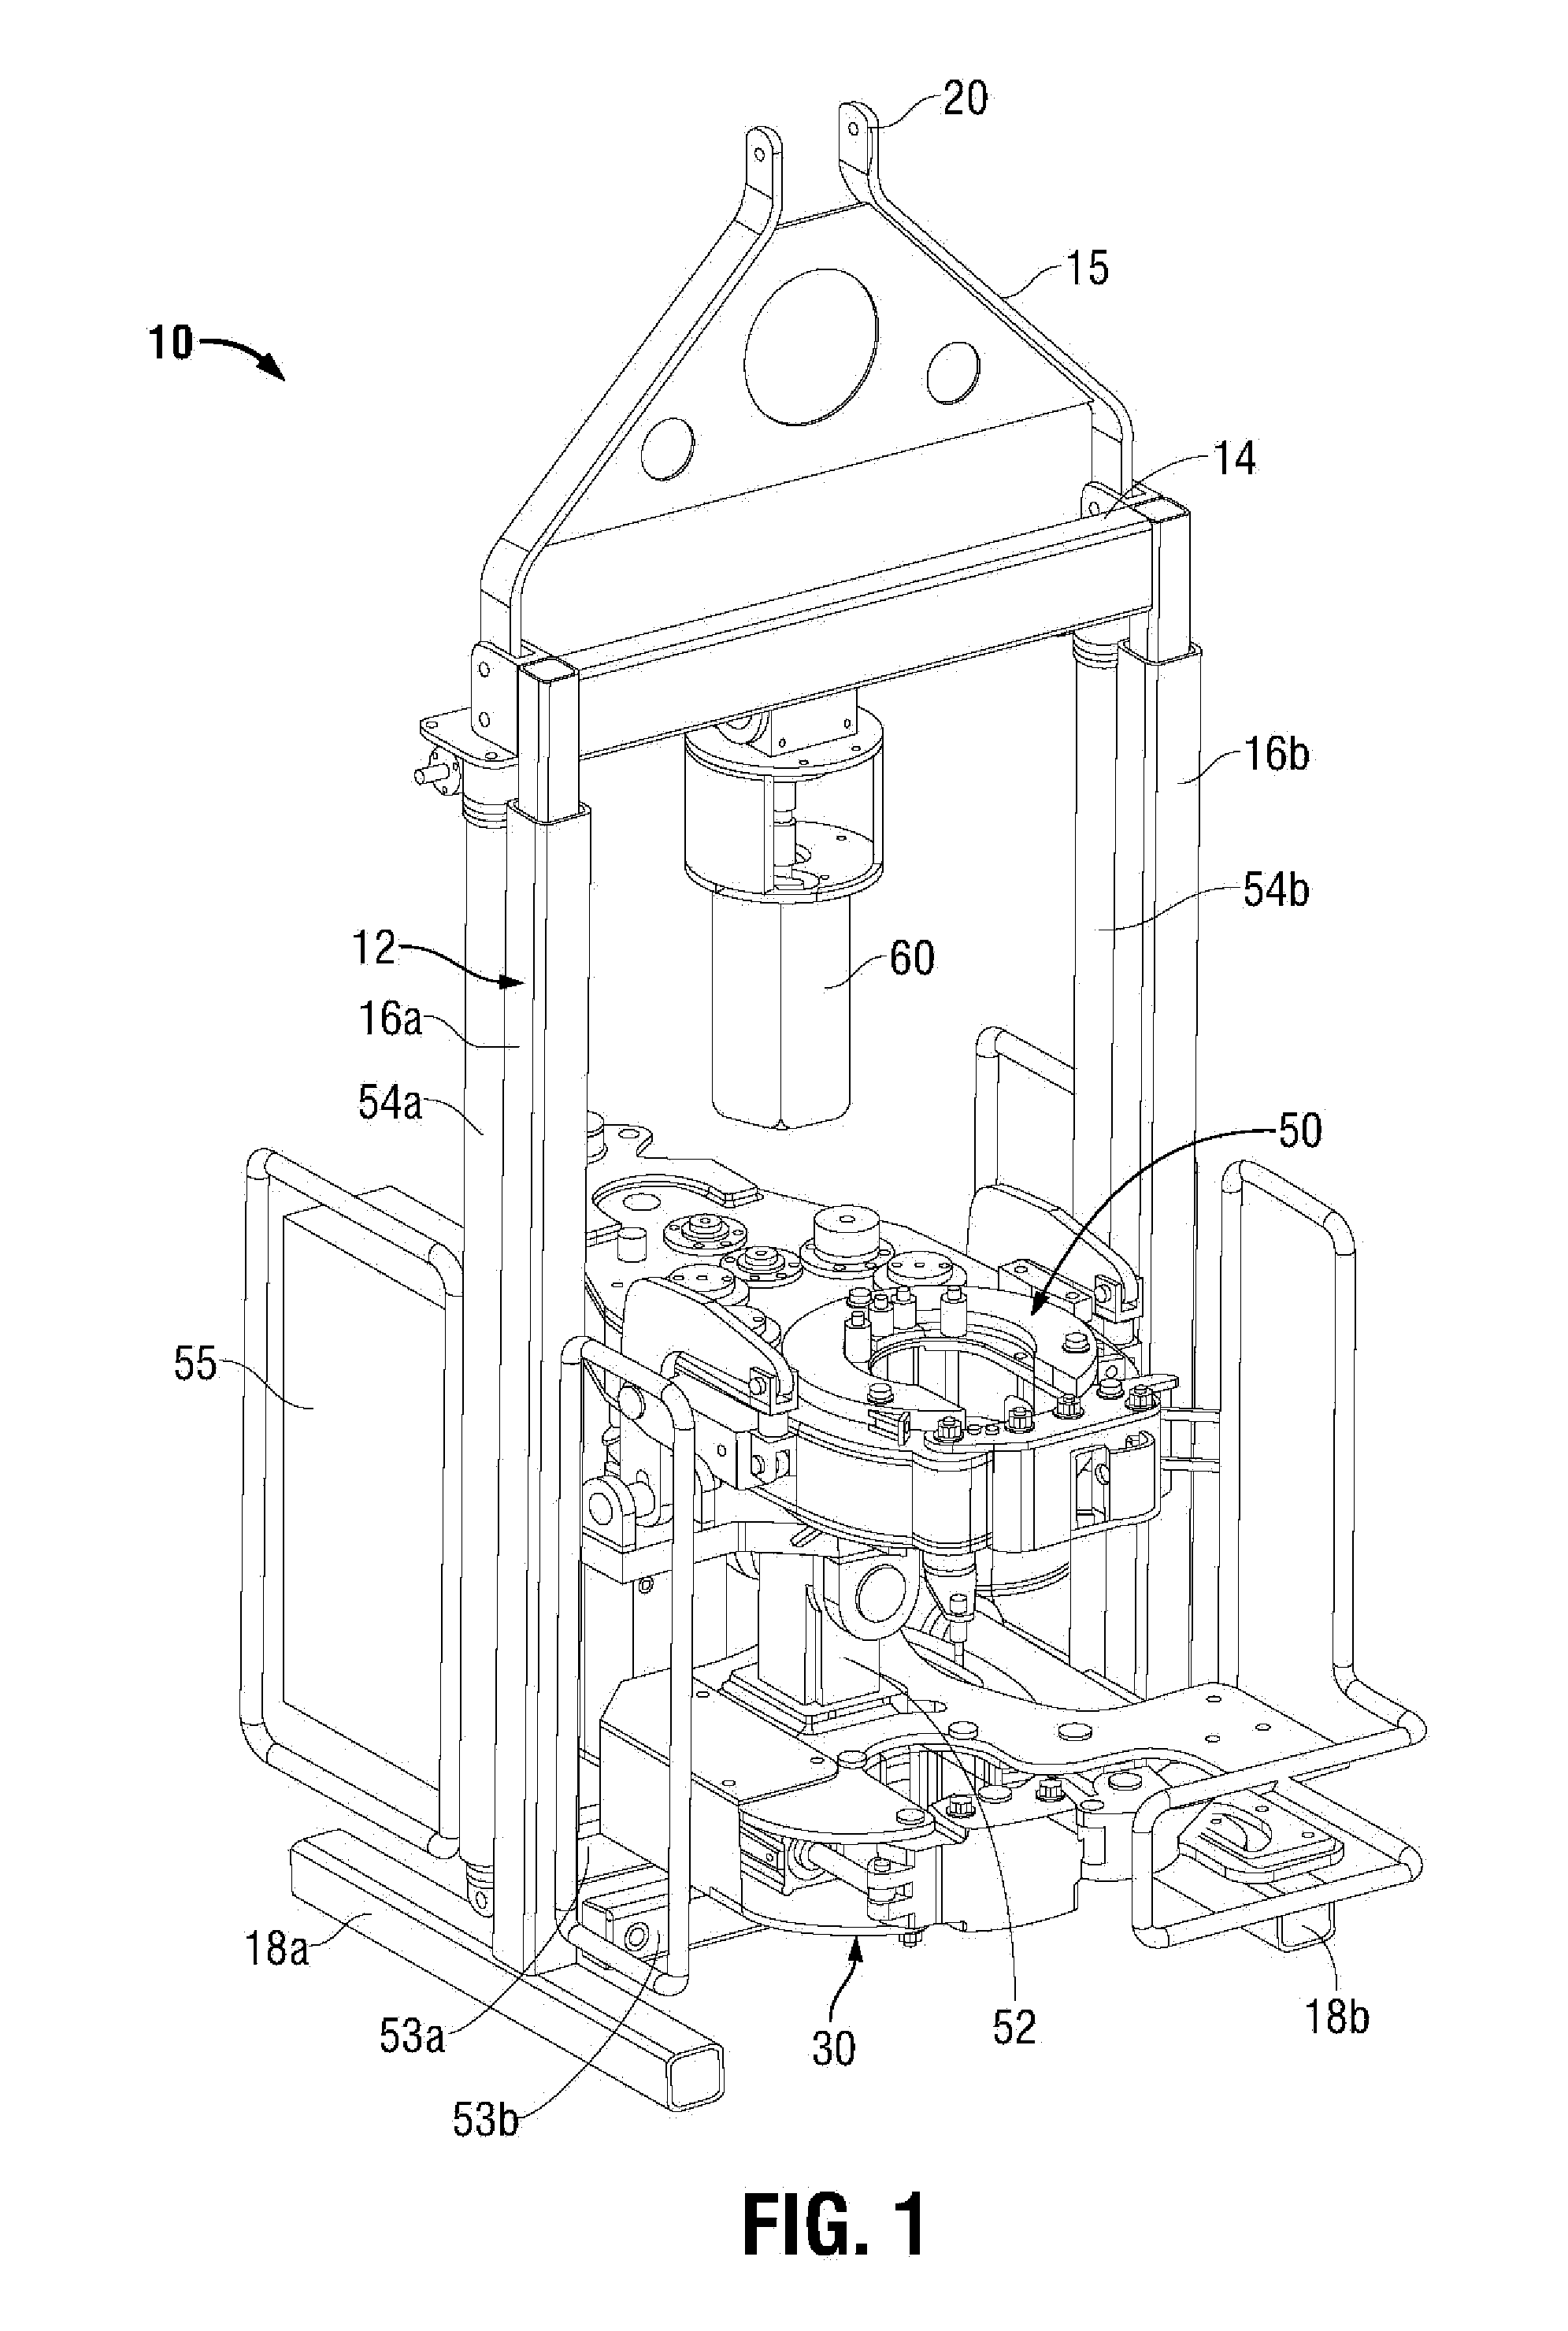 Electric tong system and methods of use